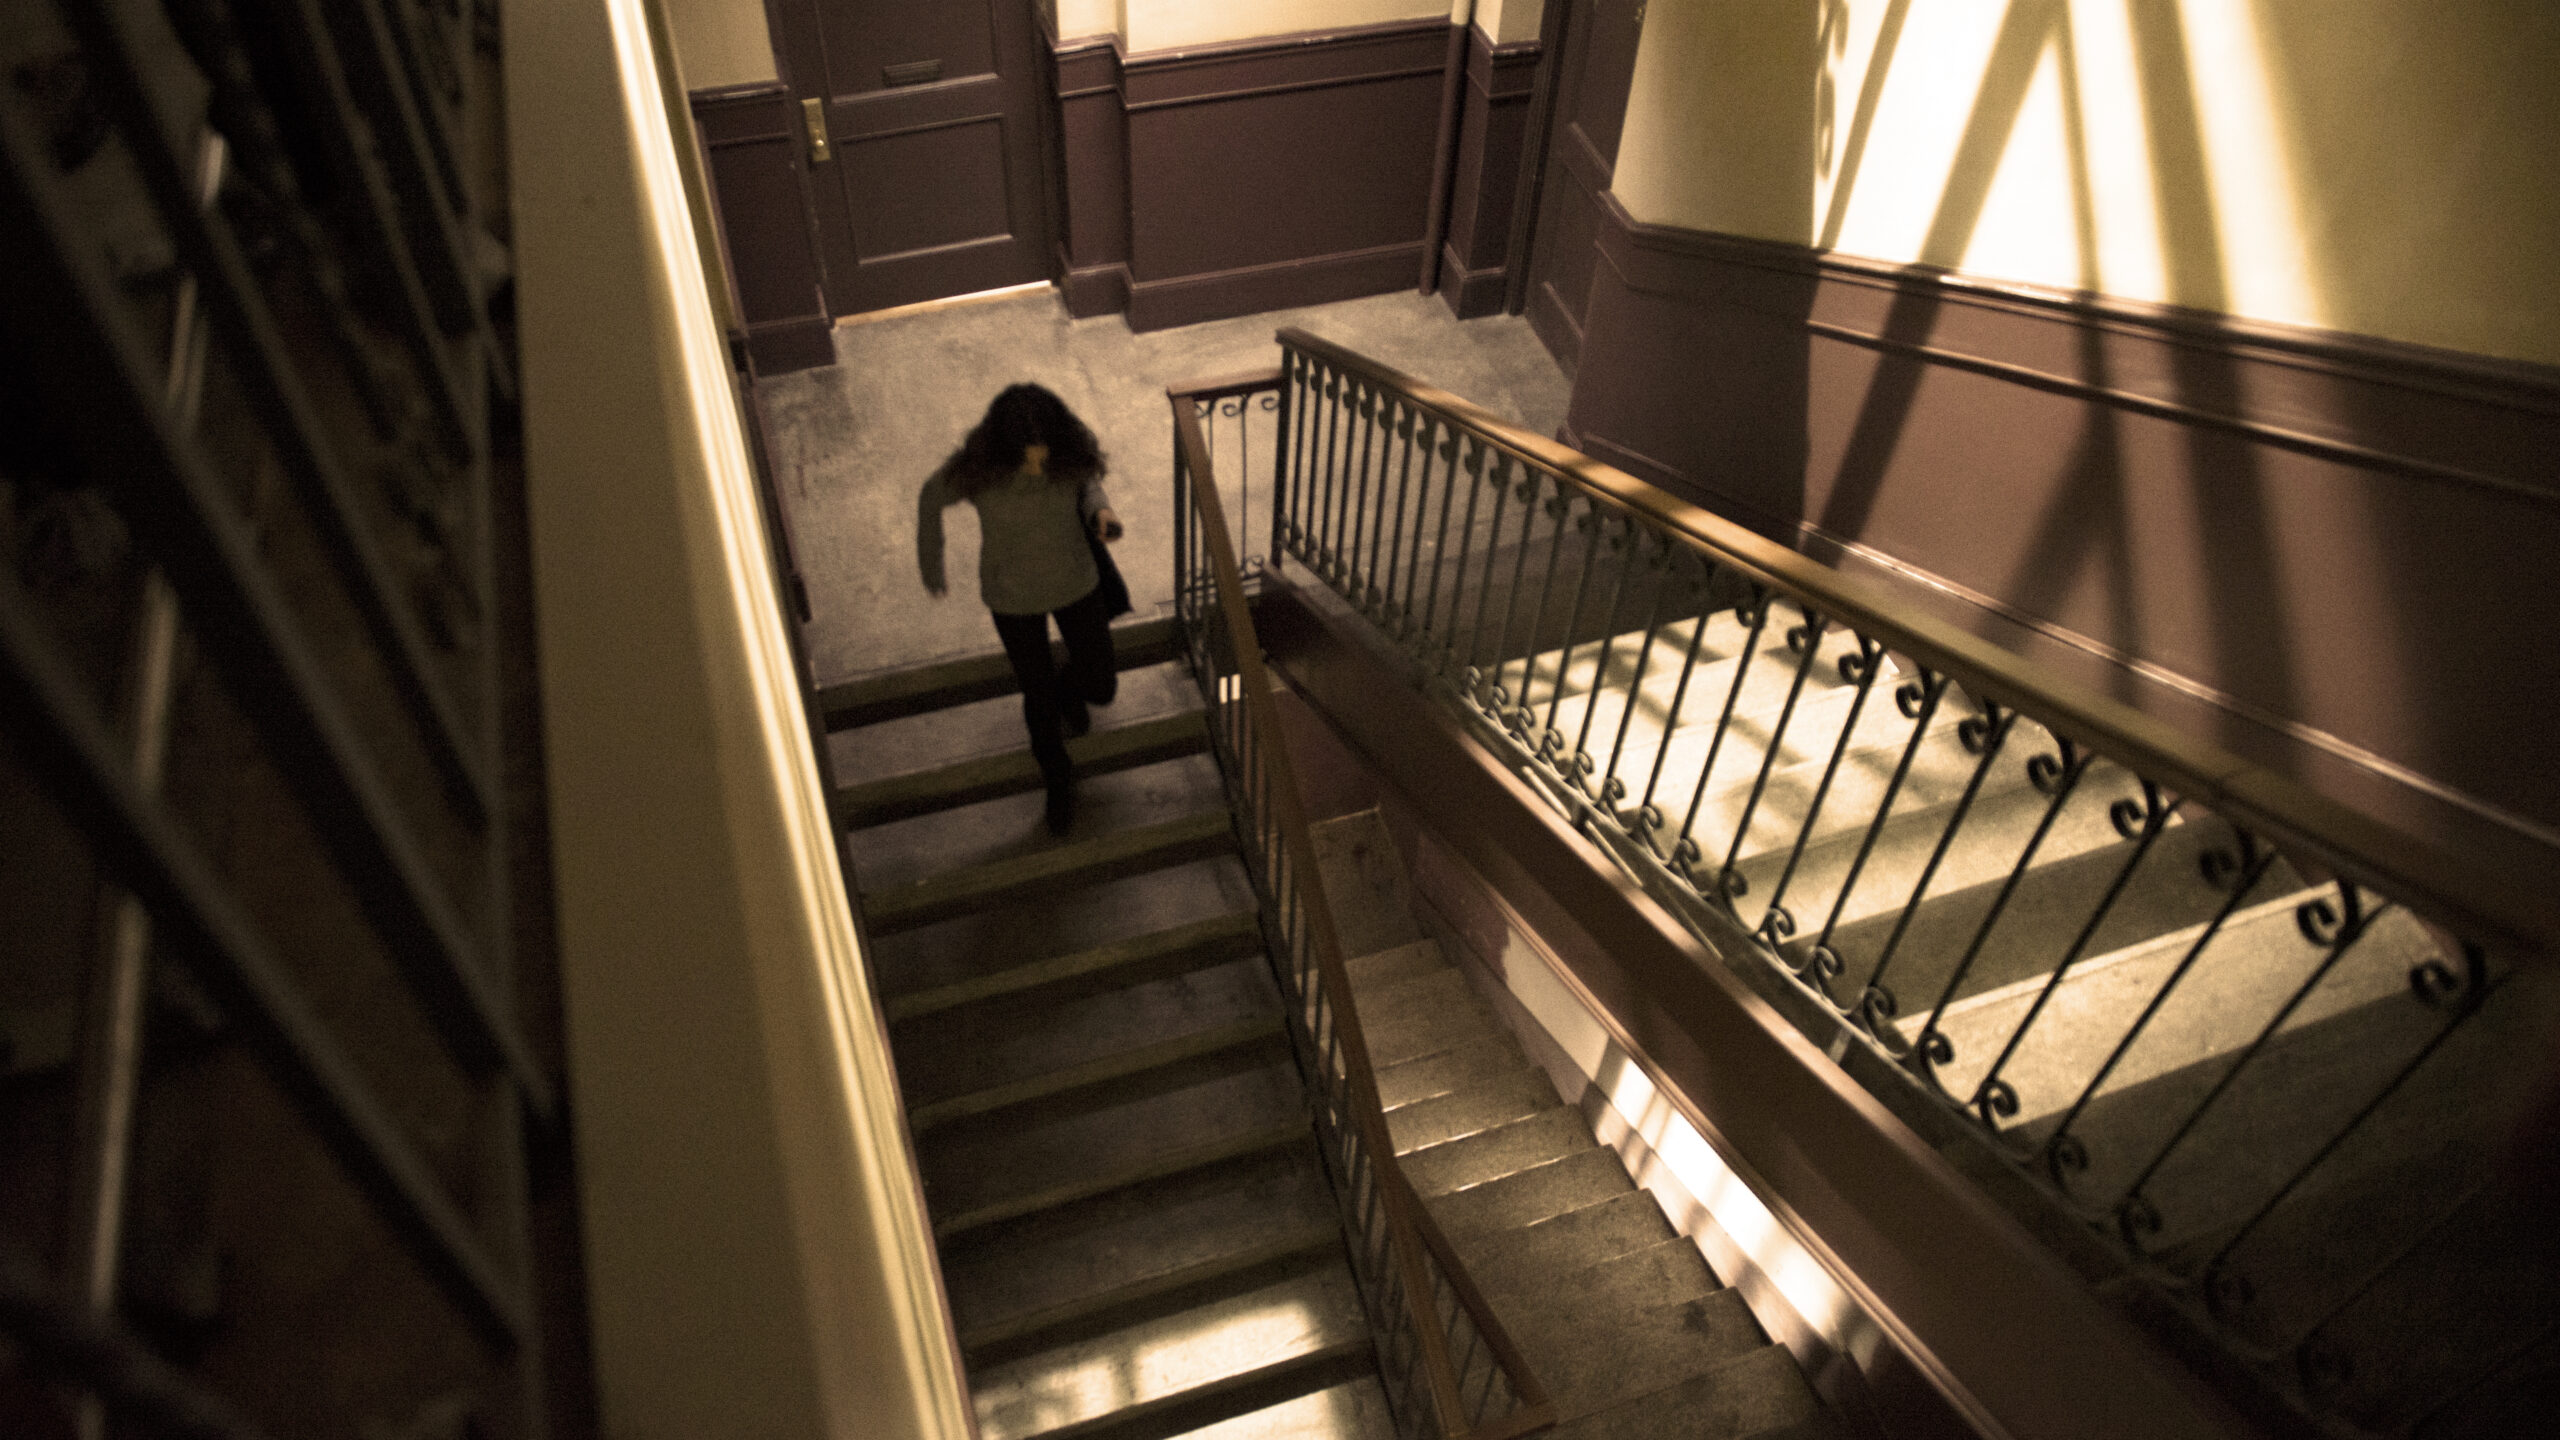 THIRD PERSON - Directed by Paul Haggis - Int. New York Apartment, Stairs, Stage Set - ©2013 - Corsan